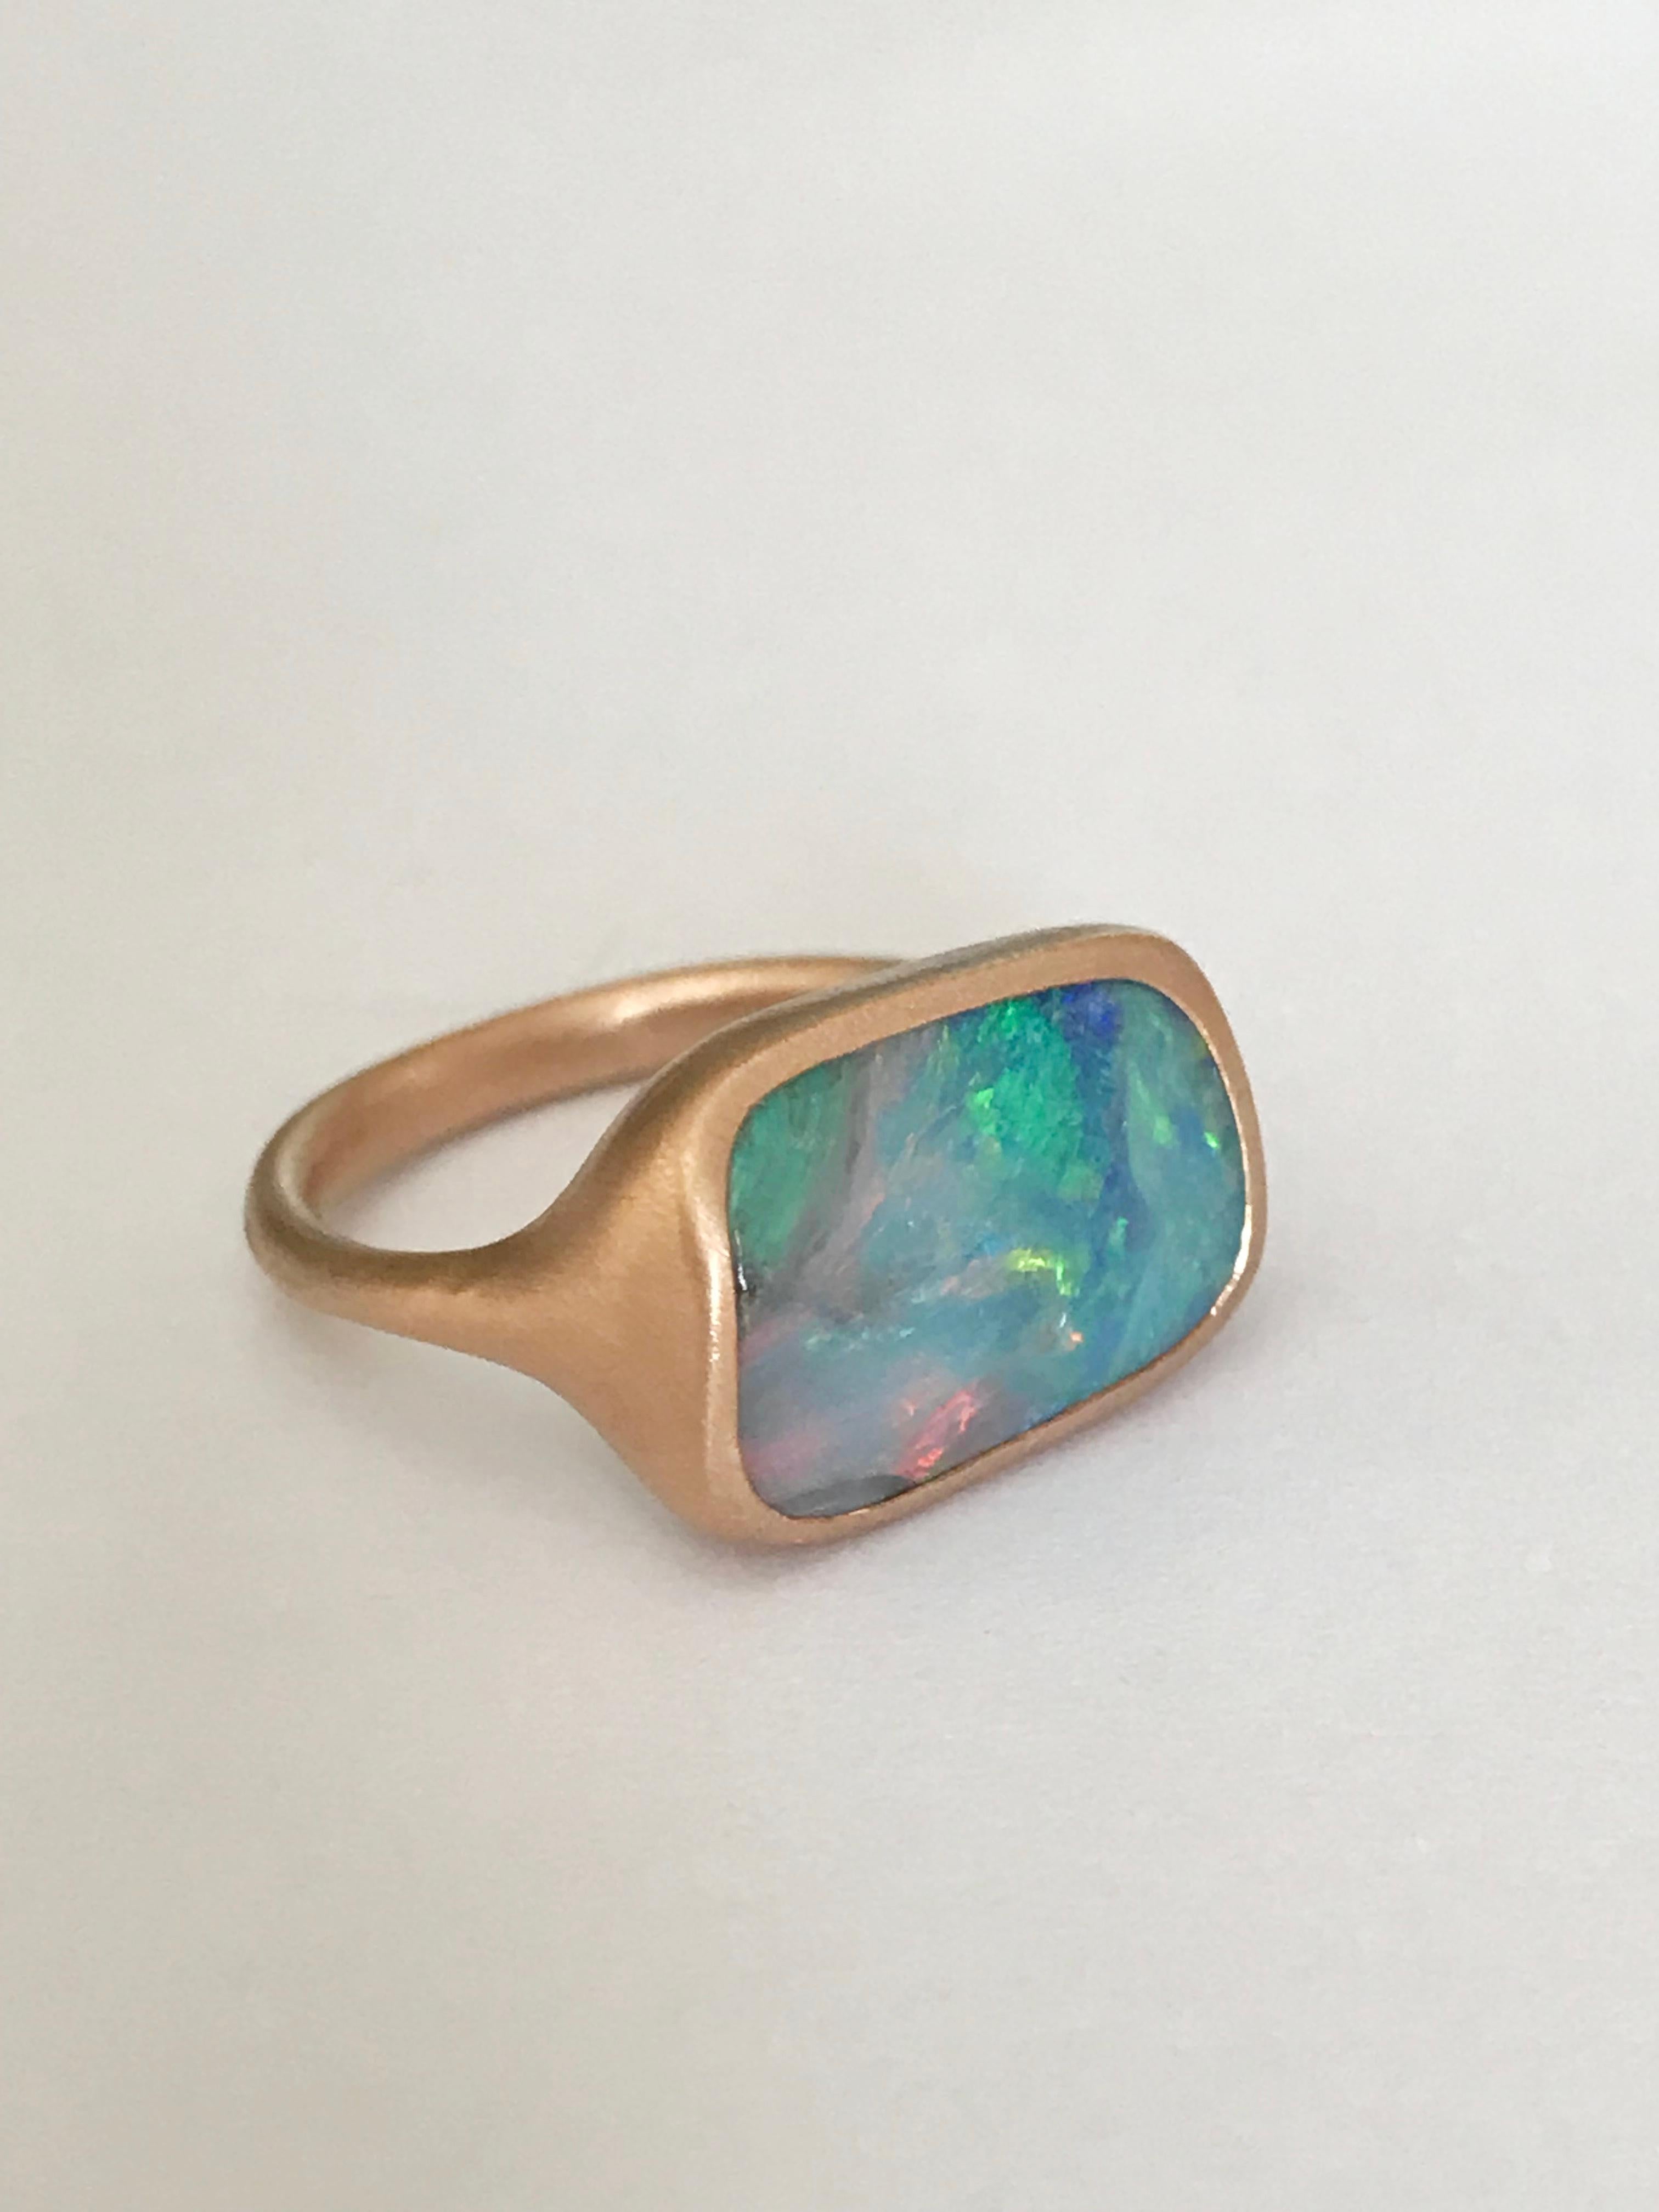 Dalben Boulder Opal Rose Gold Ring In New Condition For Sale In Como, IT